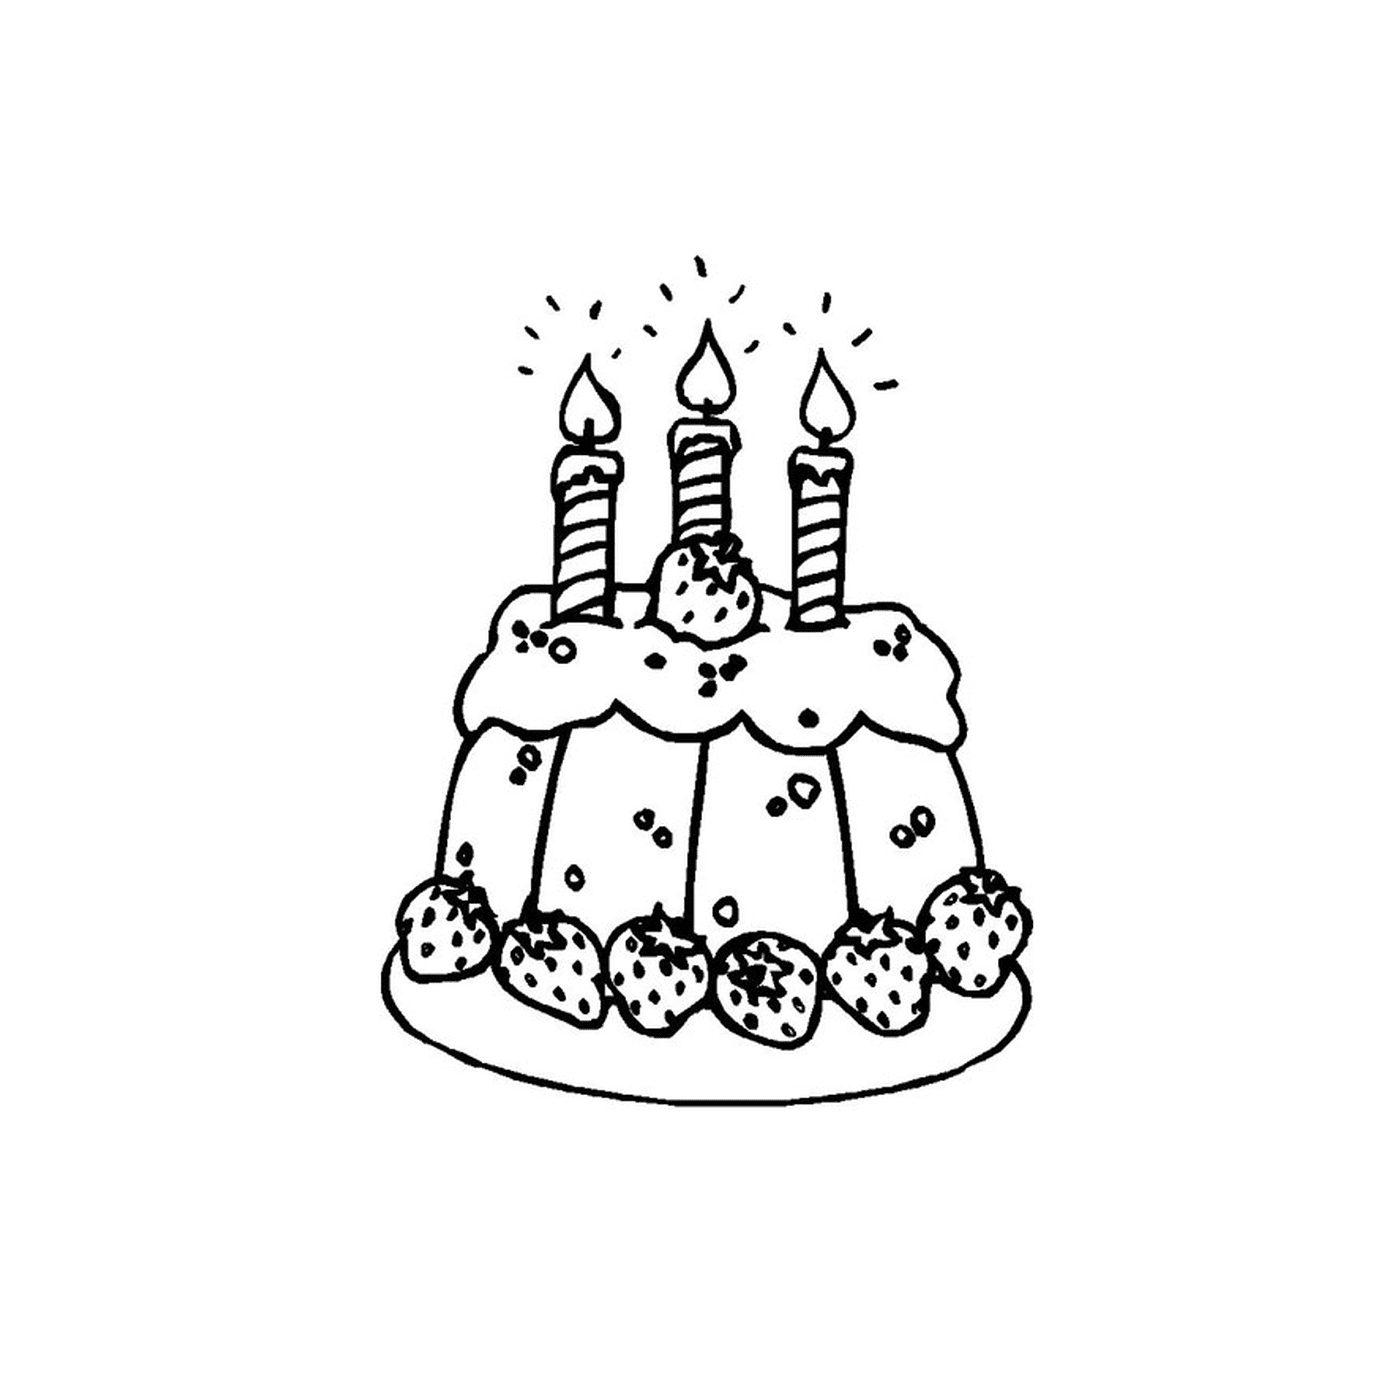  a cake with three candles lit 